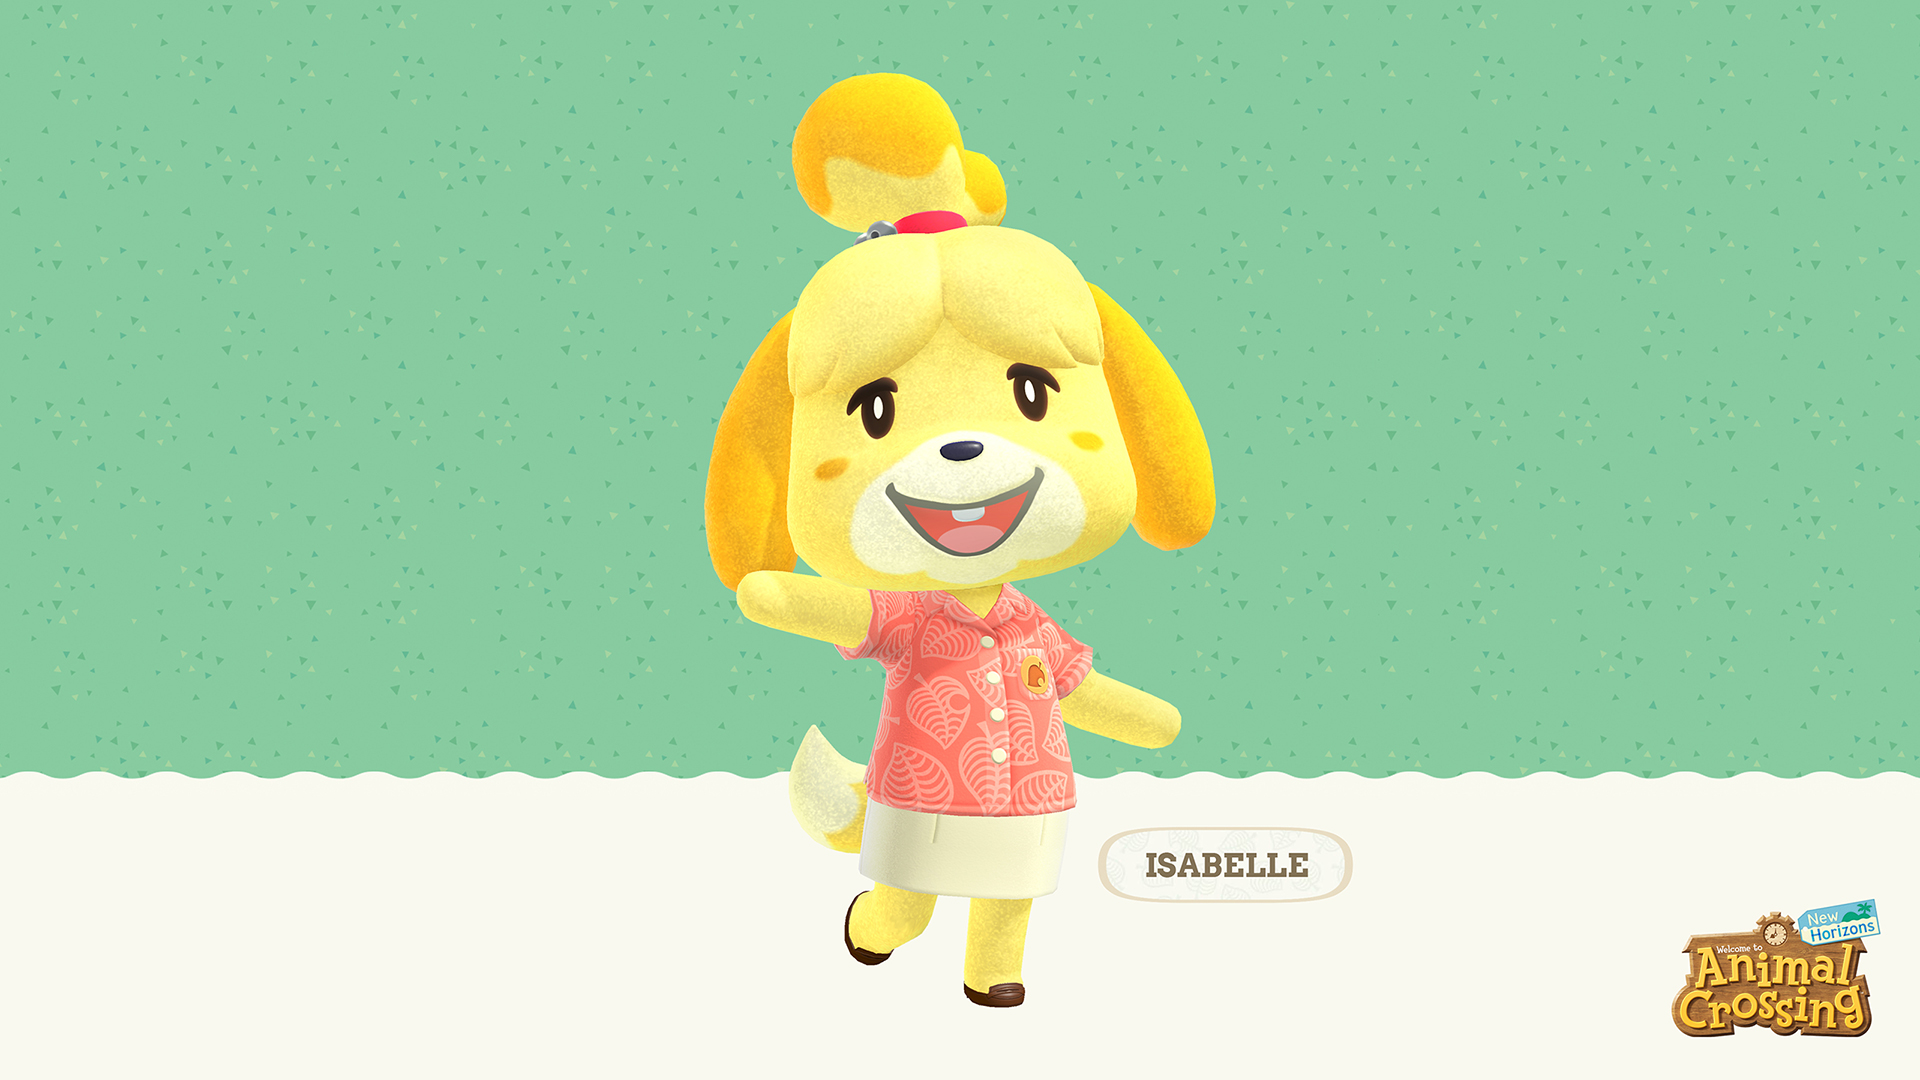 isabelle animal crossing pc backgrounds